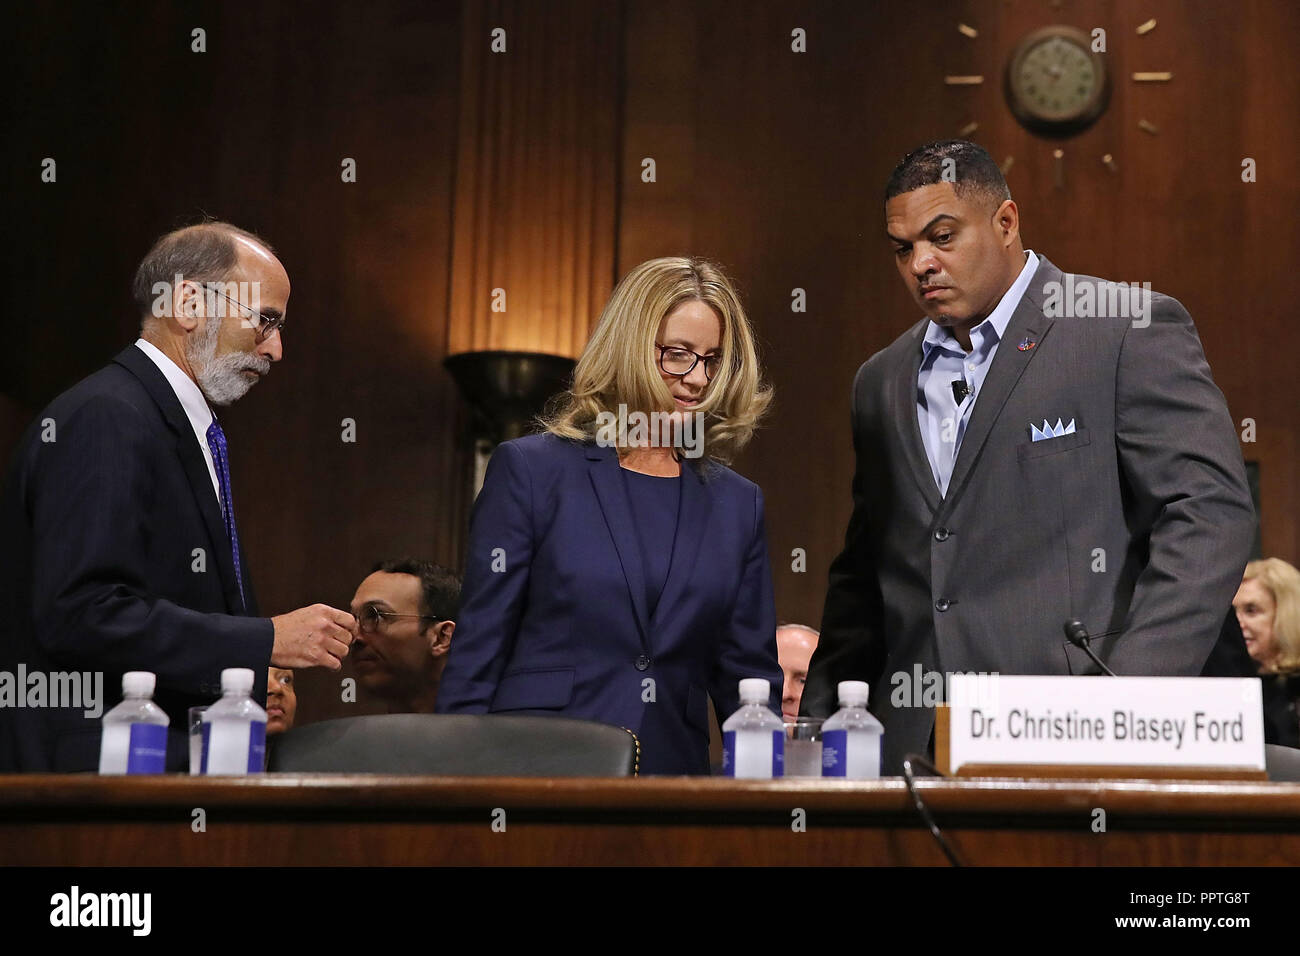 September 27, 2018 - Washington, DC, U.S. - WASHINGTON, DC - SEPTEMBER 27:  Christine Blasey Ford (C) arrives with her attorney Michael Bromwich (L) to testify before the Senate Judiciary Committee in the Dirksen Senate Office Building on Capitol Hill September 27, 2018 in Washington, DC. A professor at Palo Alto University and a research psychologist at the Stanford University School of Medicine, Ford has accused Supreme Court nominee Judge Brett Kavanaugh of sexually assaulting her during a party in 1982 when they were high school students in suburban Maryland.  (Photo by Win McNamee/Getty I Stock Photo